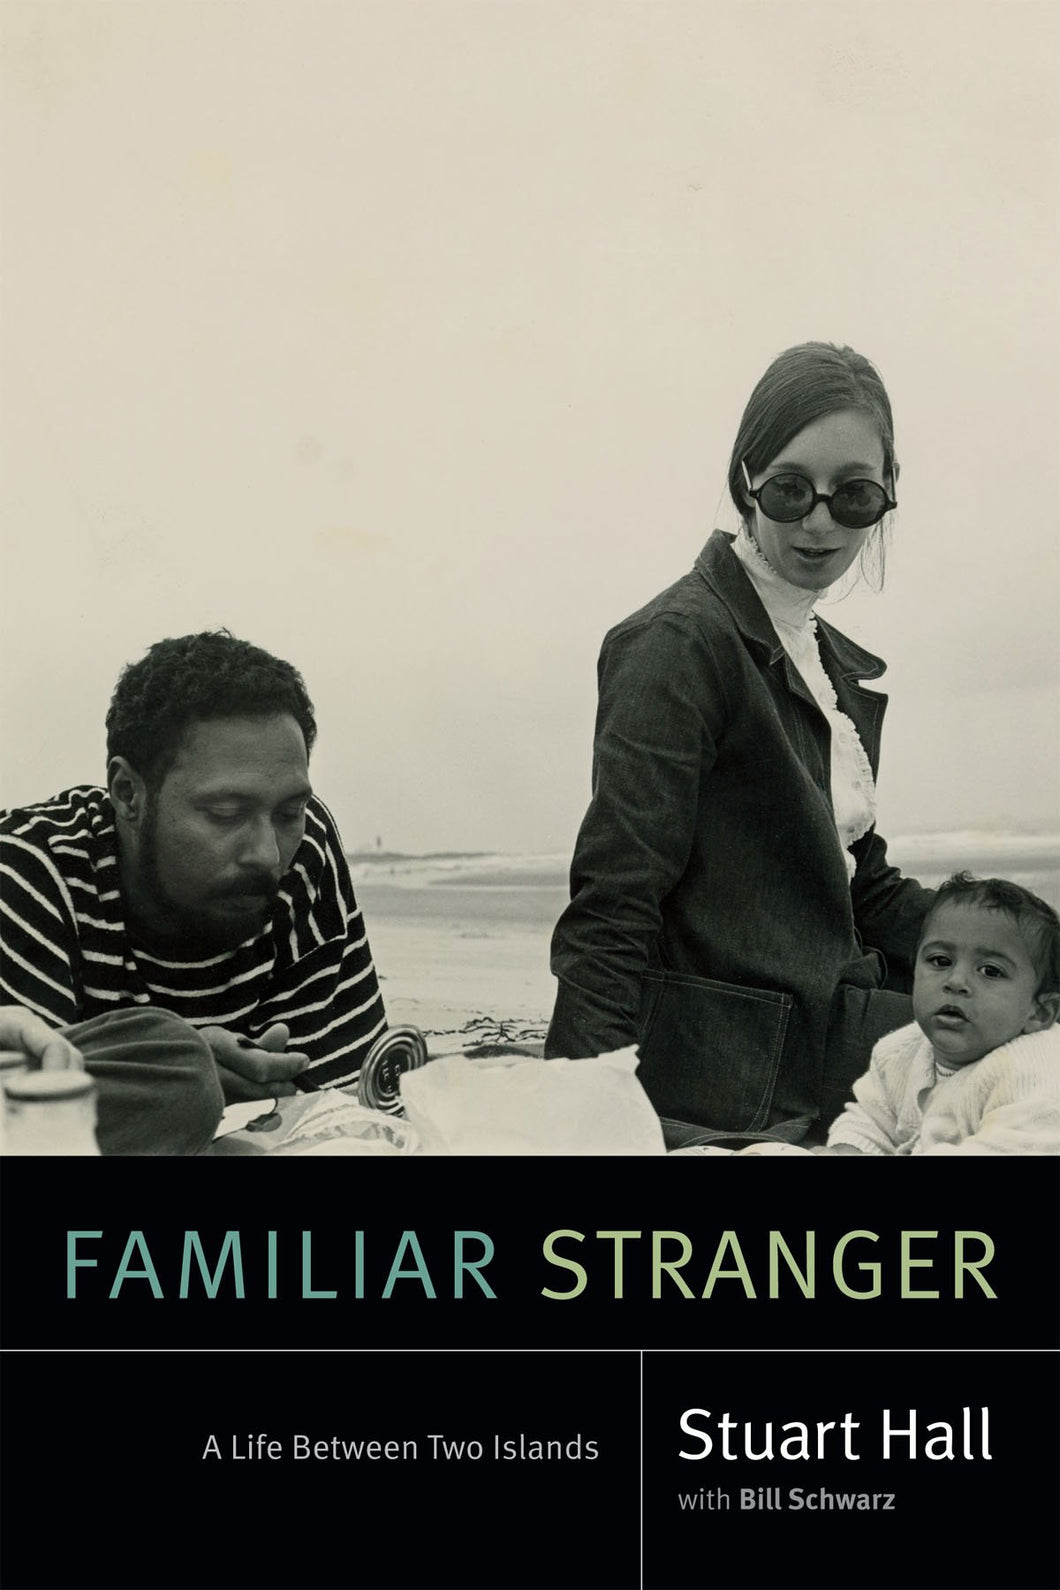 Familiar Stranger: A Life Between Two Islands by Stuart Hall